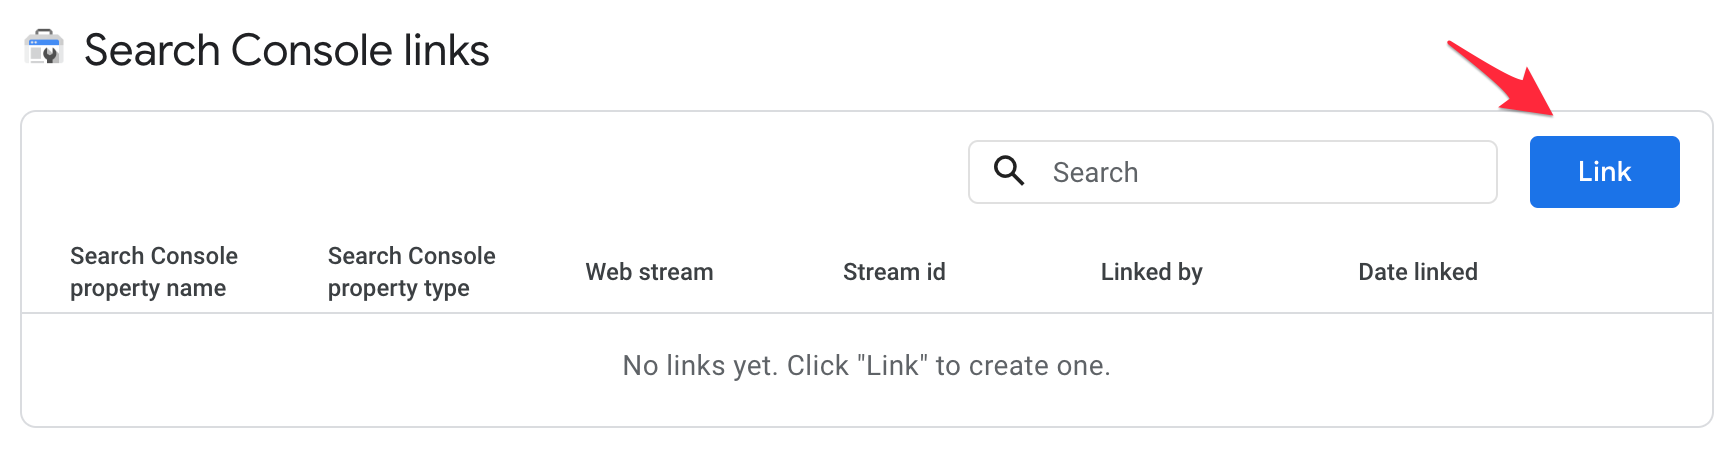 Create a link with Search Console